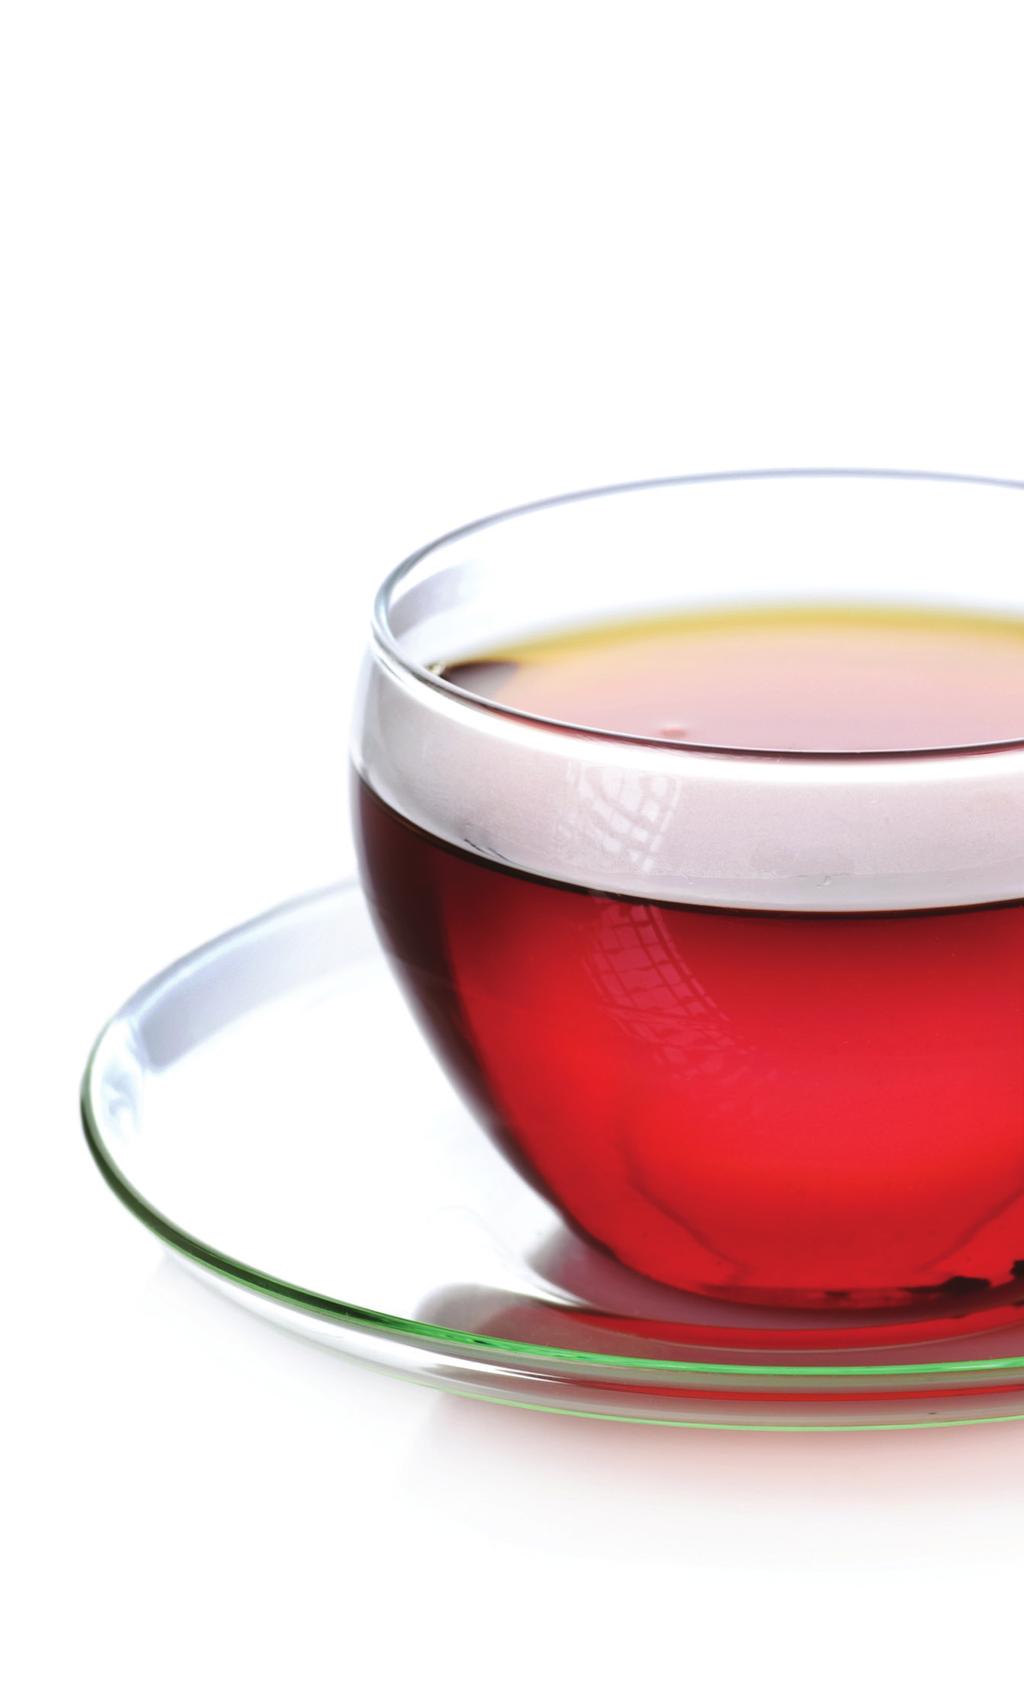 British Afternoon TrADITIonAL english This traditional tasting tea is a blend of the finest Assam teas from the rich flood plains of the Brahmaputra River in India, known to deliver exceptional